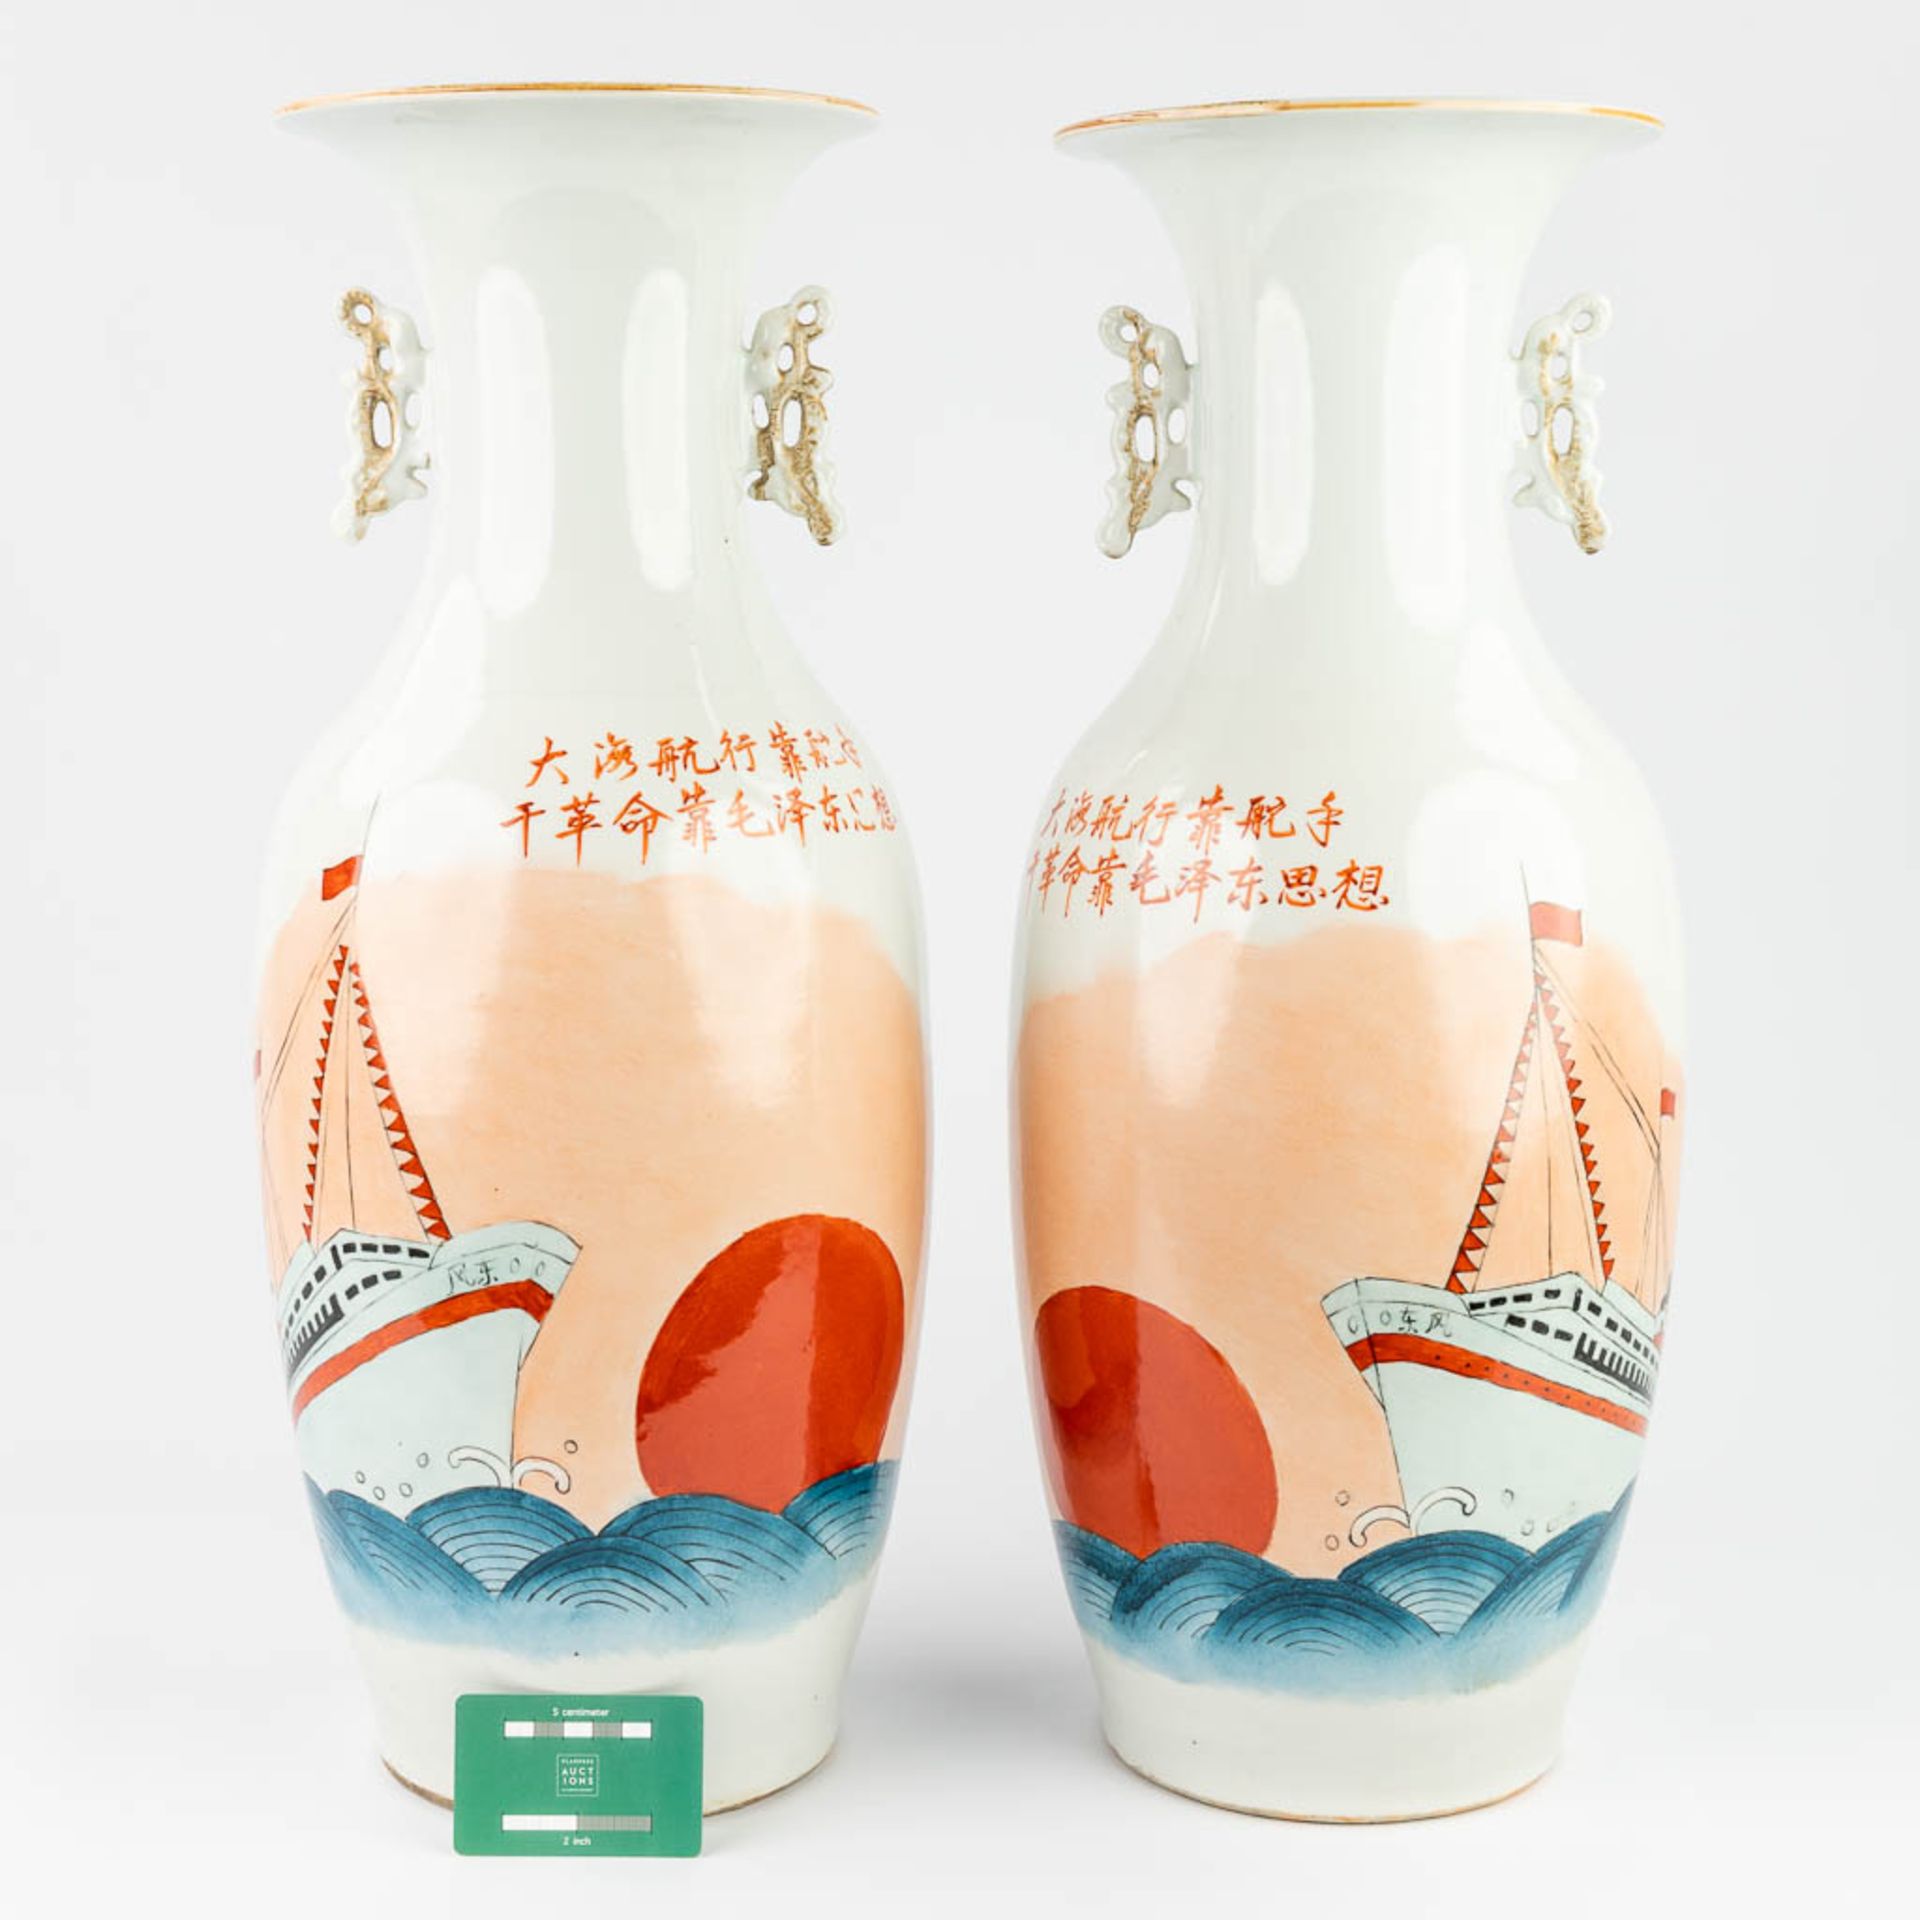 A pair of Chinese vases made of glazed porcelain, and decorated with ships (59,5 x 23 cm) - Image 3 of 14